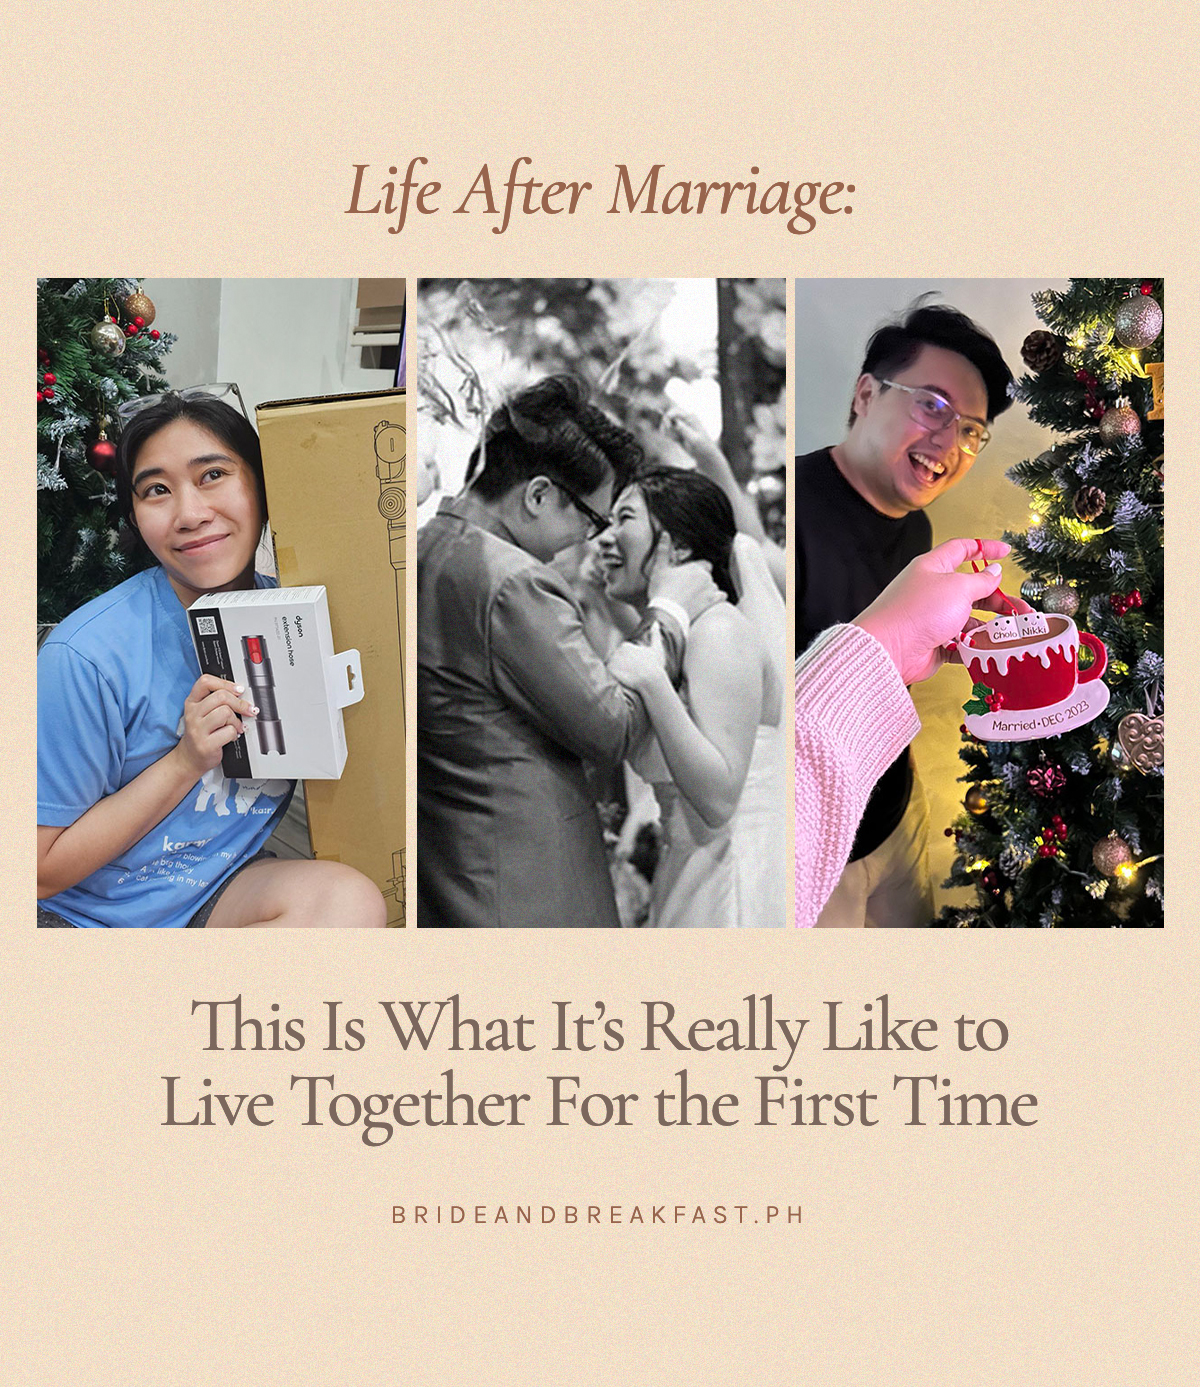 Life After Marriage: This Is What It’s Really Like to Live Together For the First Time